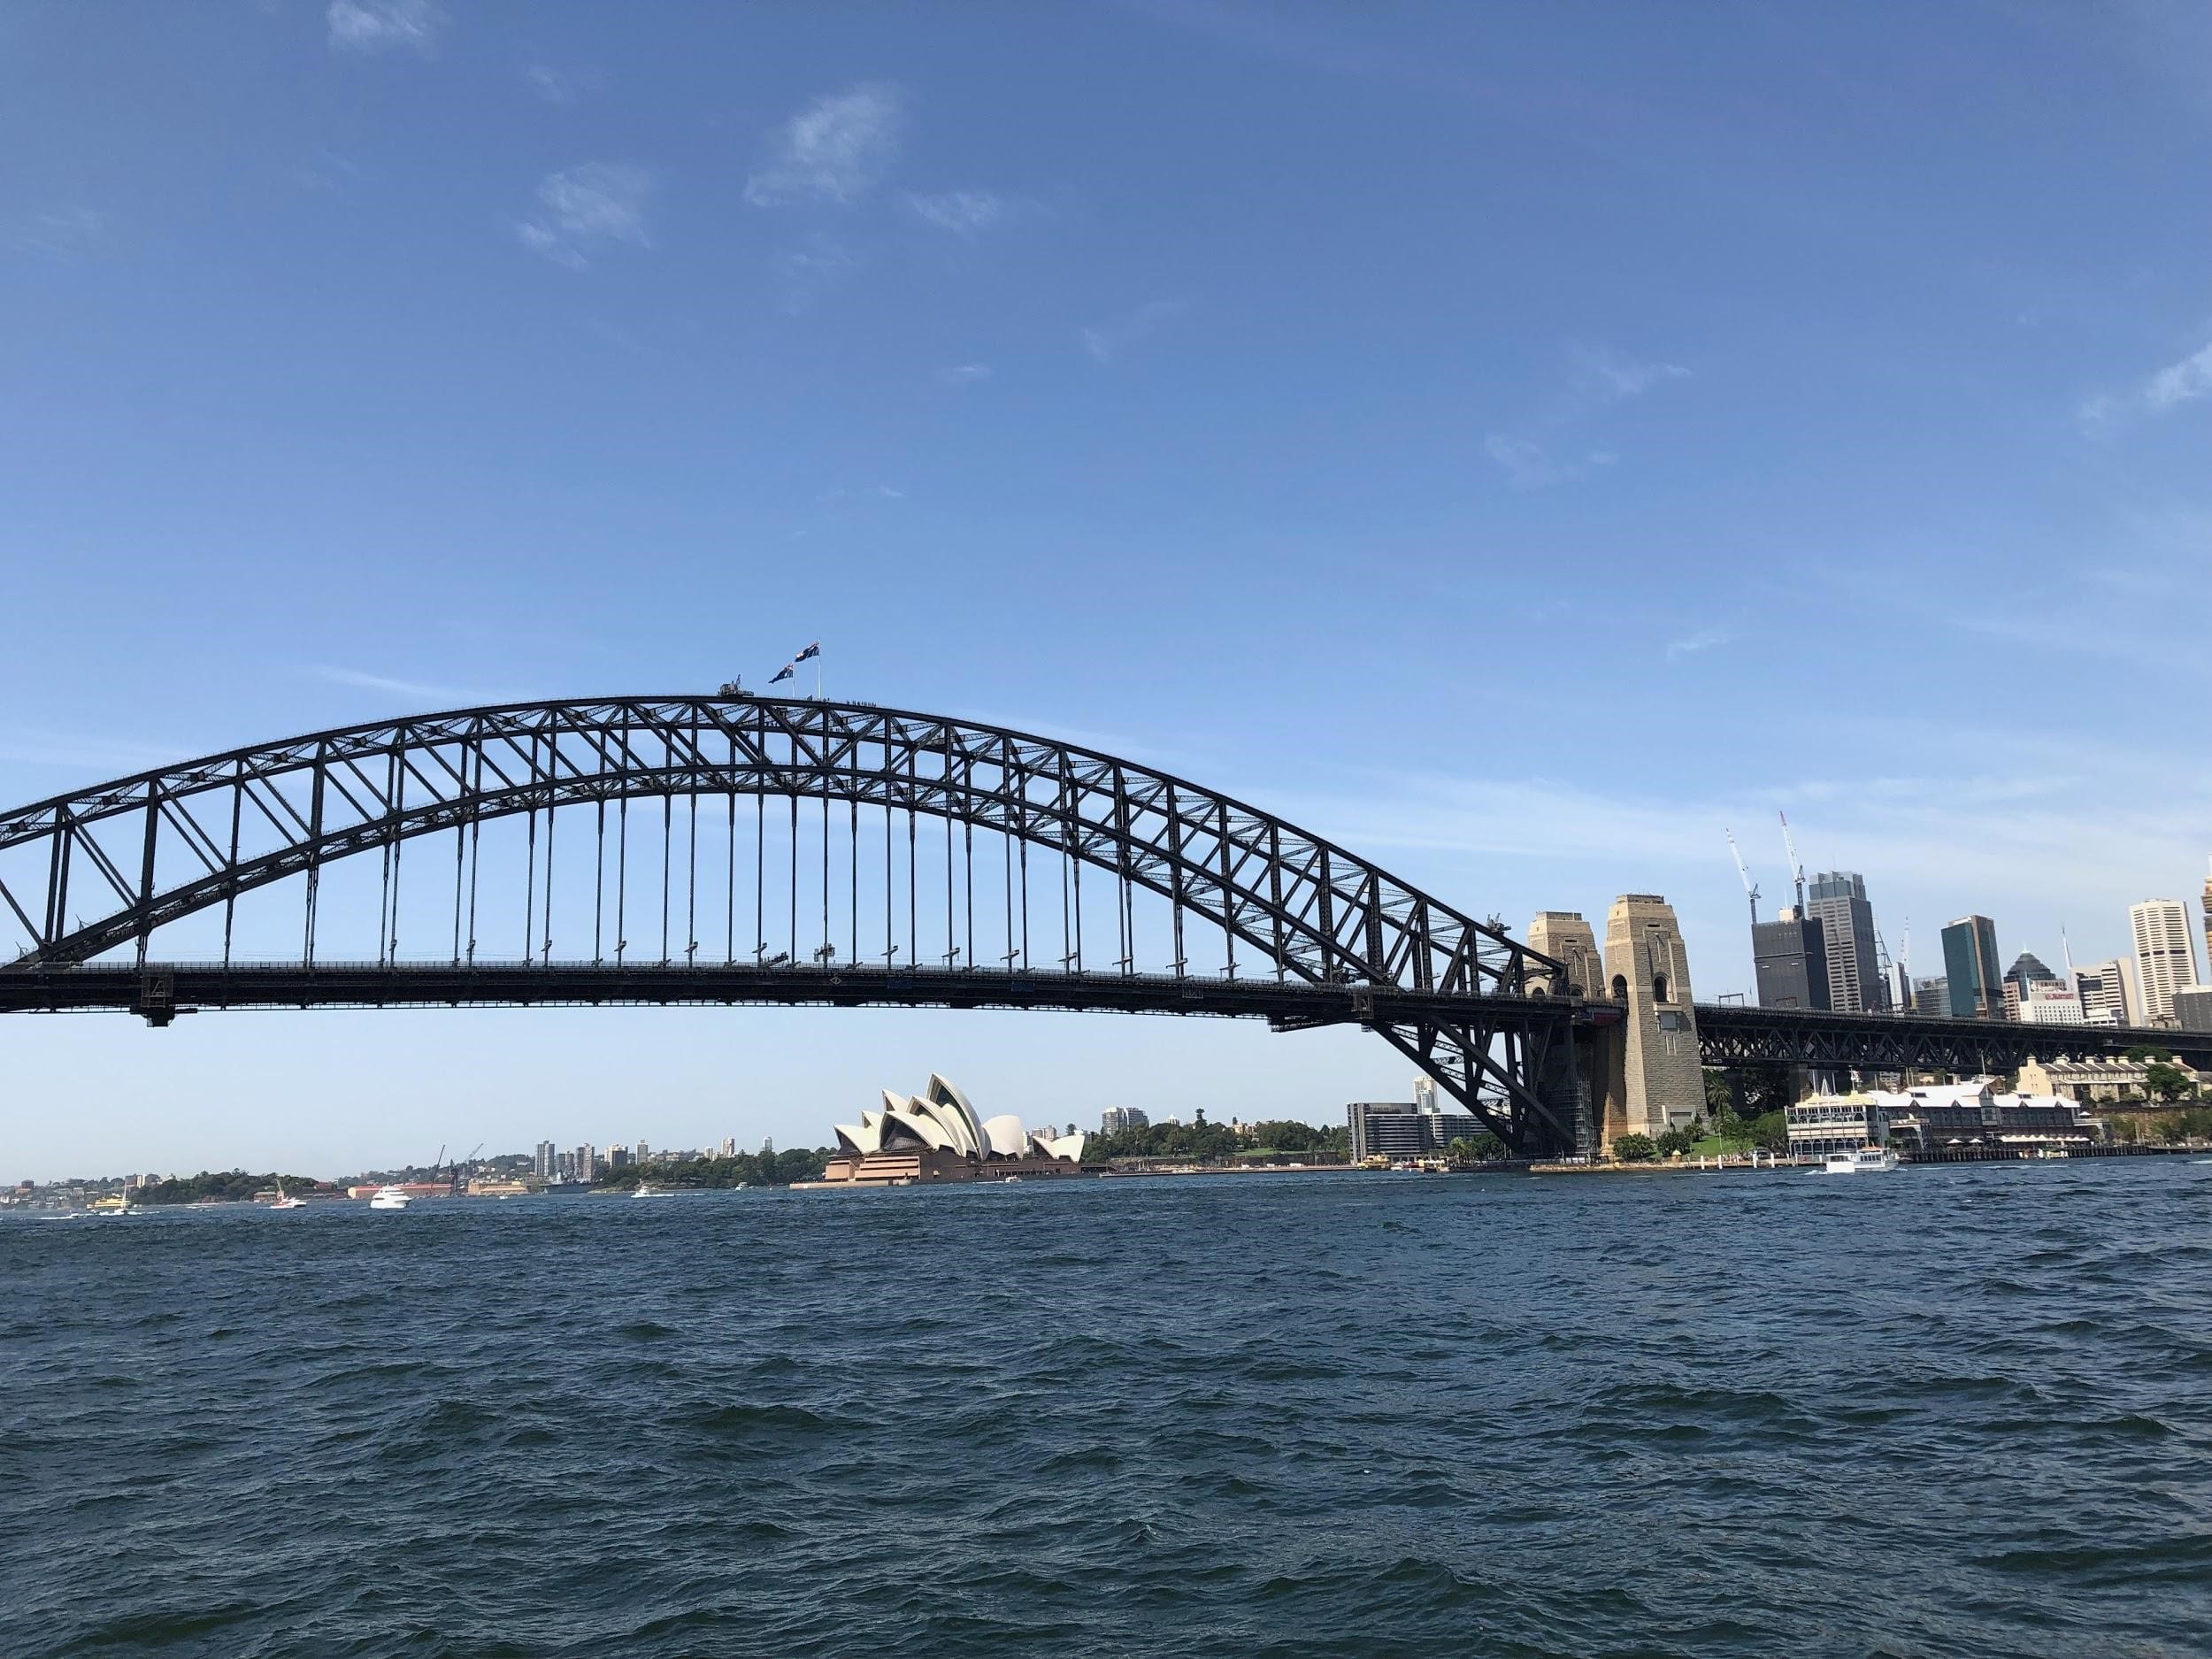 bridge with Sydney Opera House in background with blue sky